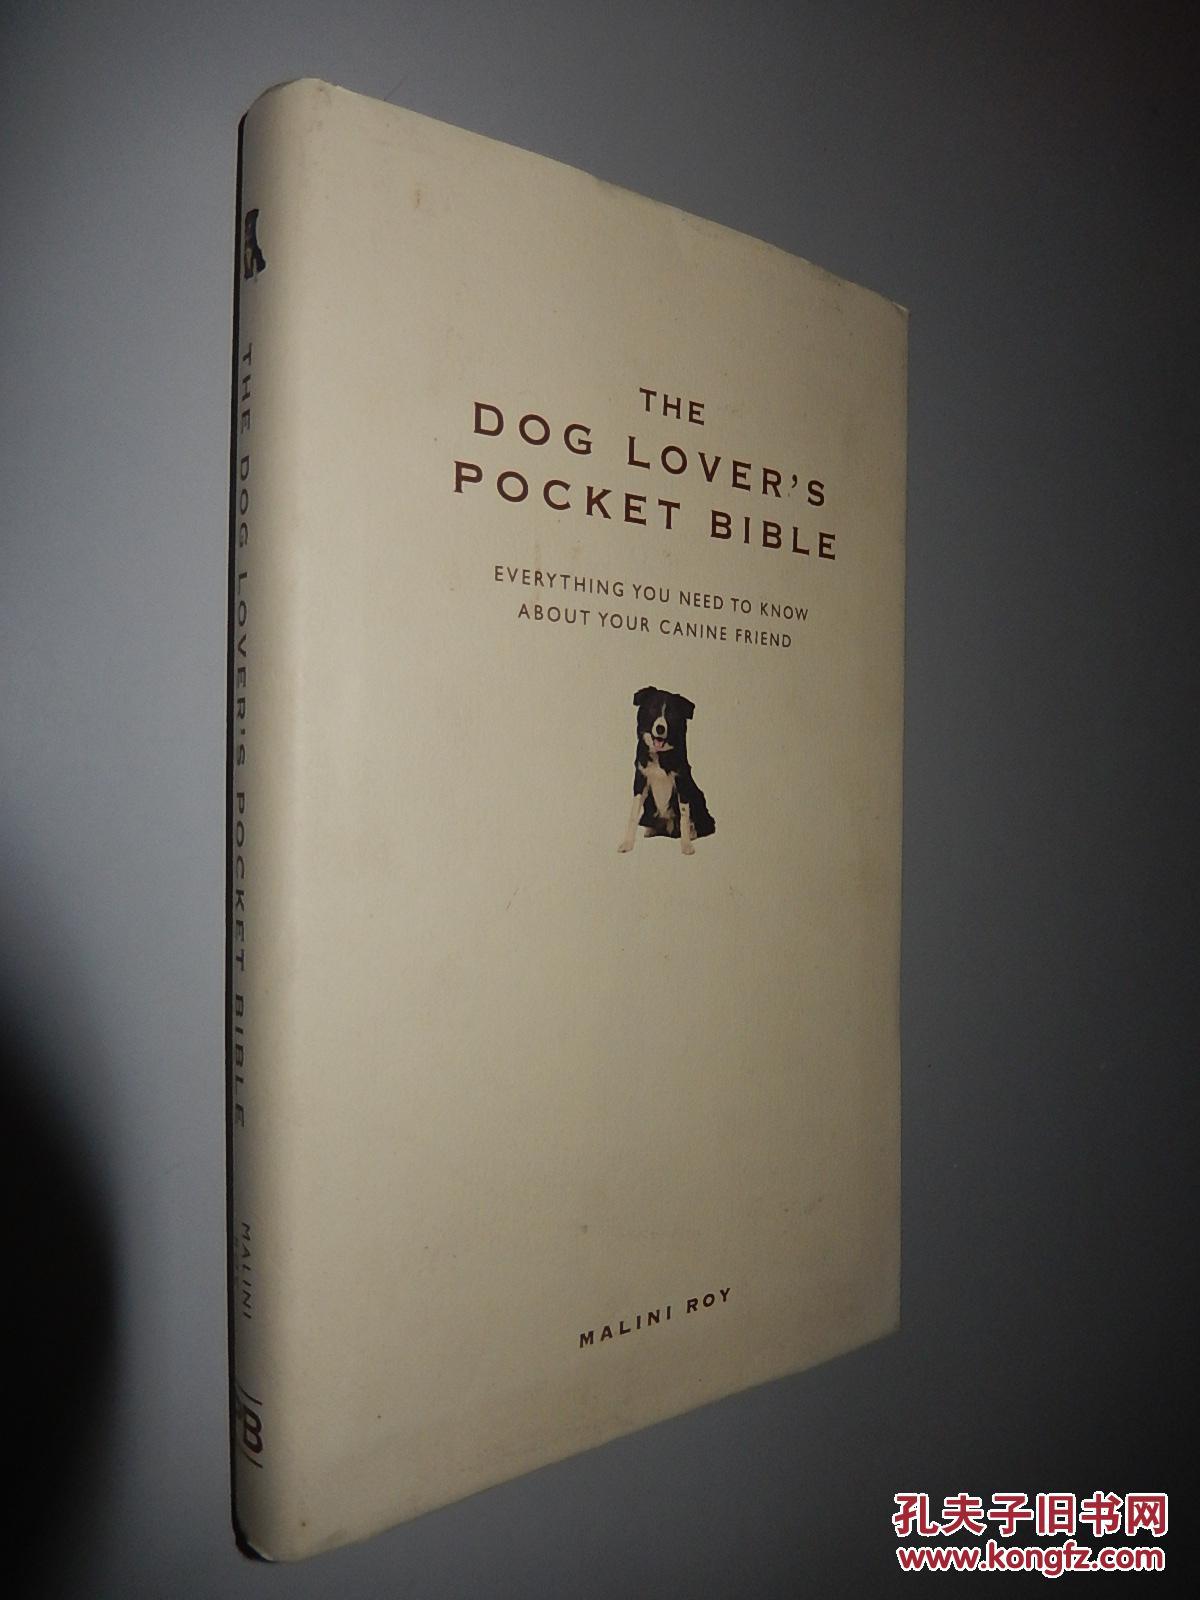 The Dog Lovers Pocket Bible: Everything you need to know about your canine friend 英文原版精装